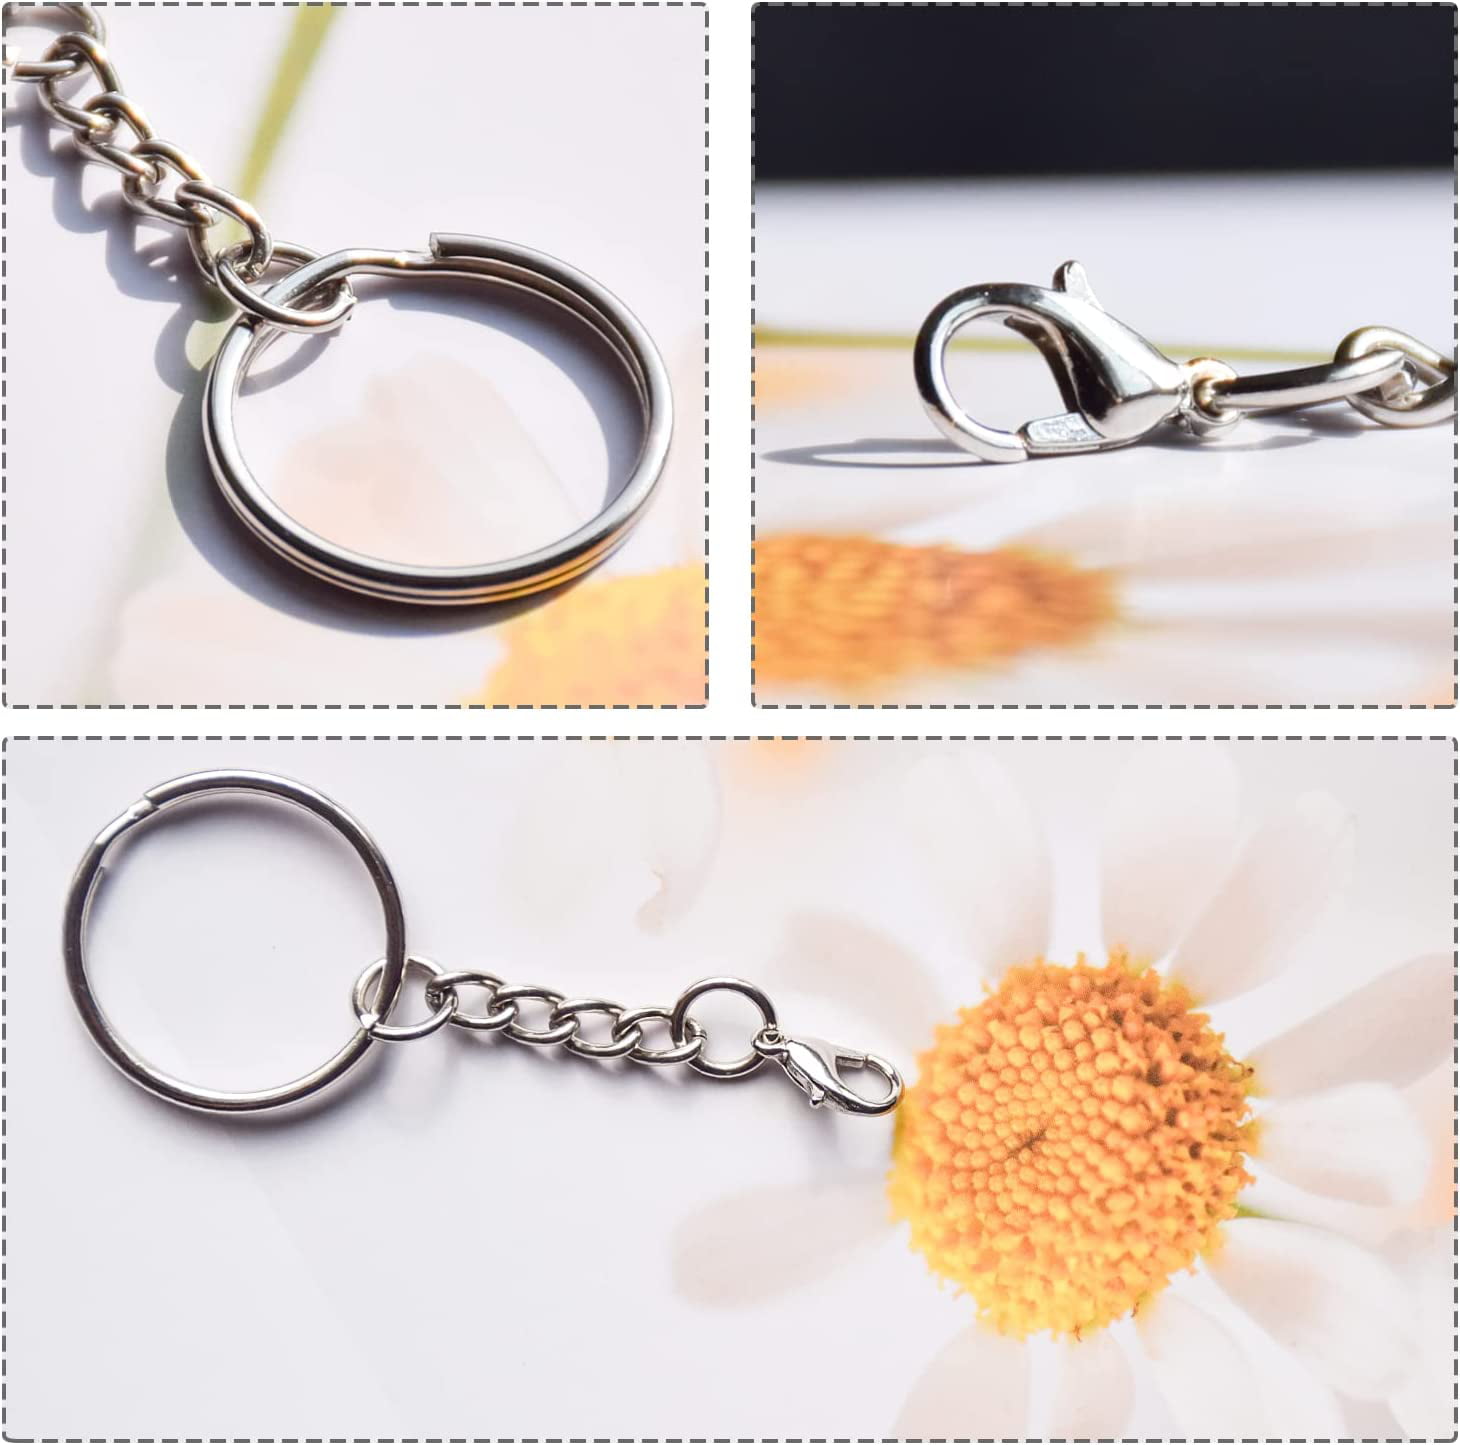 Keychain Rings with Chain, 50PCS Key Chain Kit Include Split Key Ring with  Chain,Open Jump Rings,Lobster Clasp,Keychain Ring for Crafts,Resin and  Jewelry Making Supplies 